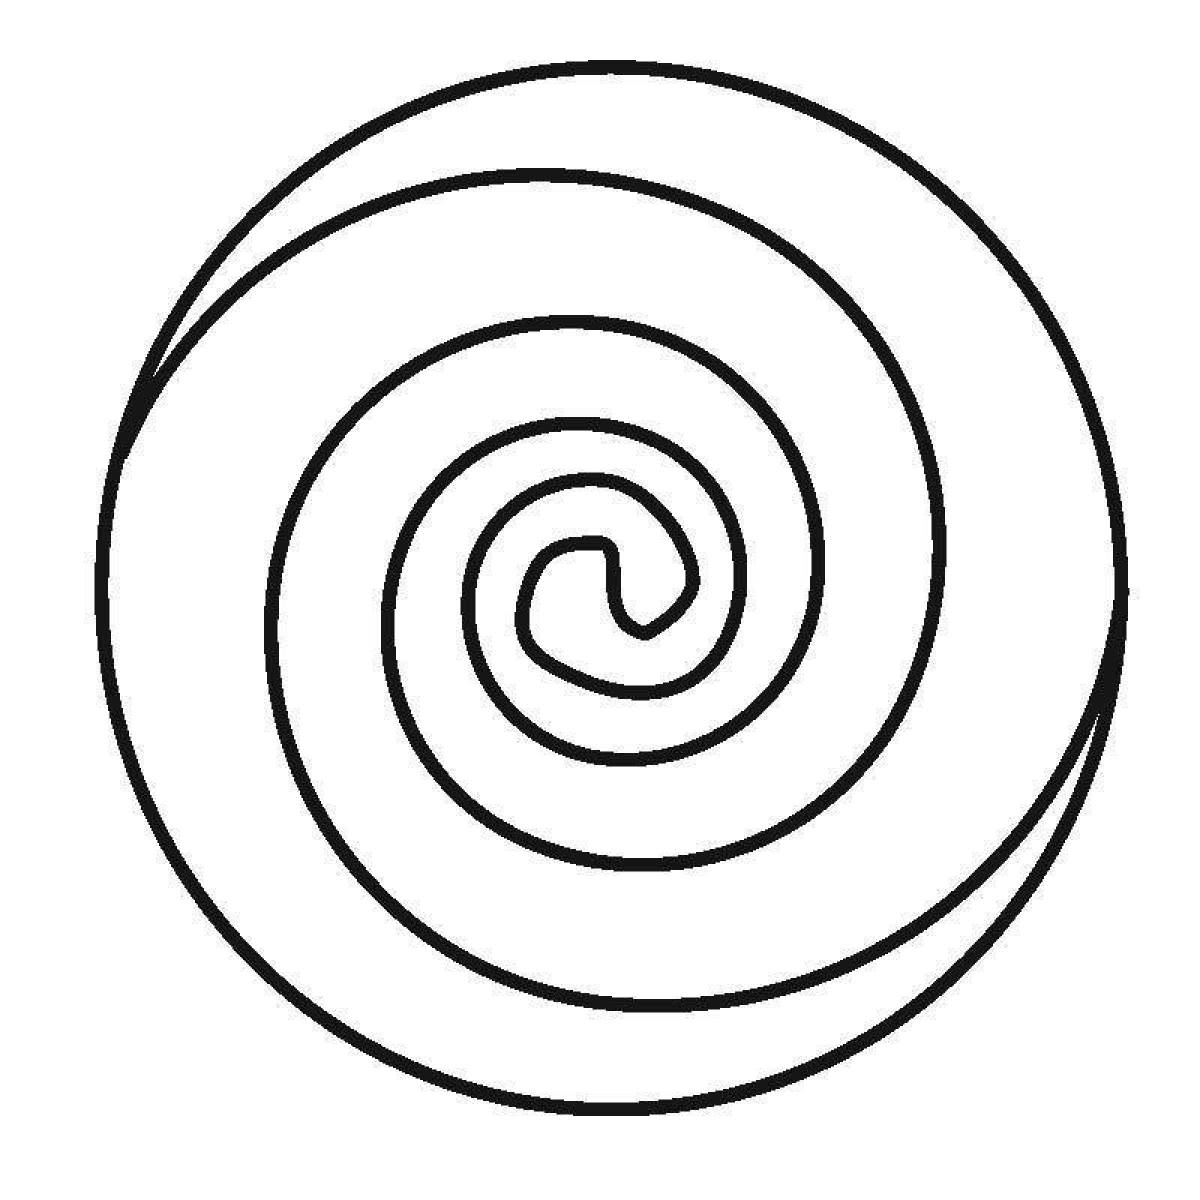 Coloring page graceful round spiral